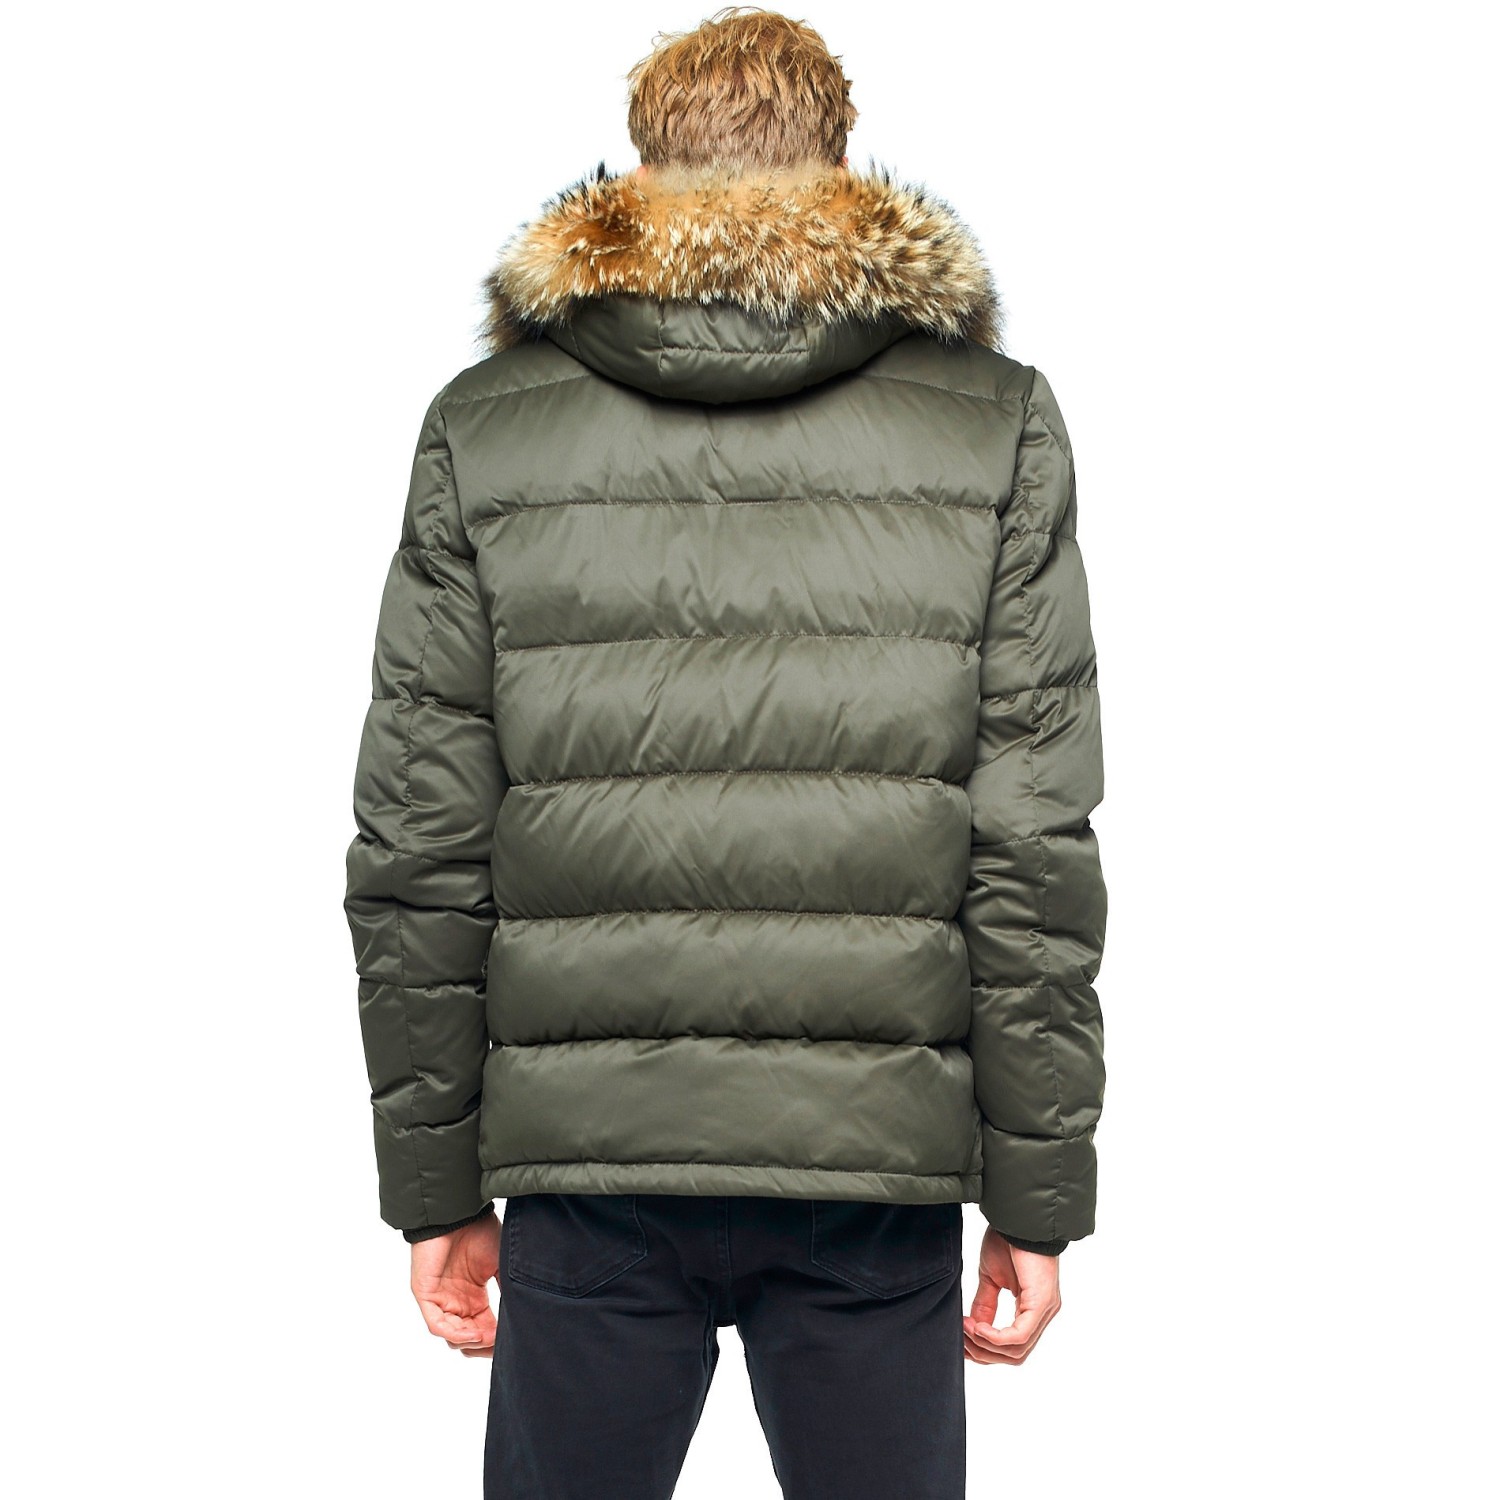 WSPLYSPJY Mens Faux-Fur Collar Hoodies Winter Faux Fur Lined Quilted Down Jacket Coat